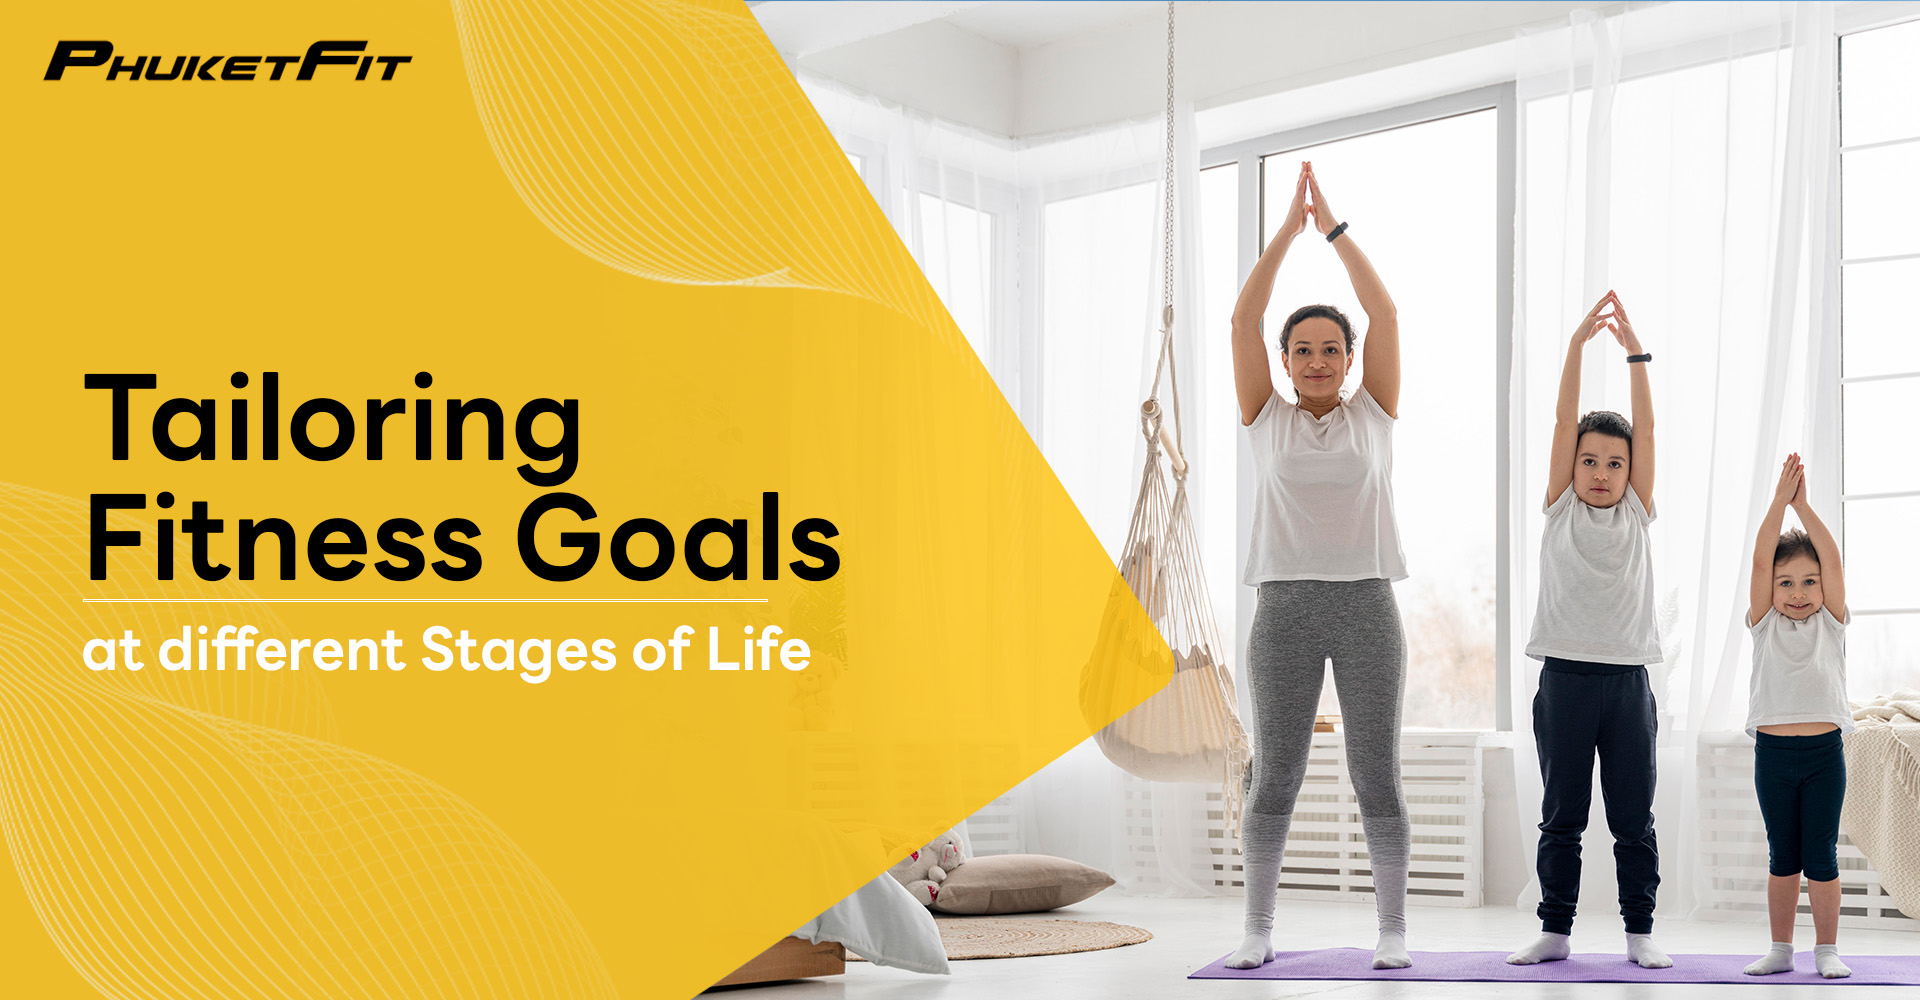 Tailoring Fitness Goals at different Stages of Life